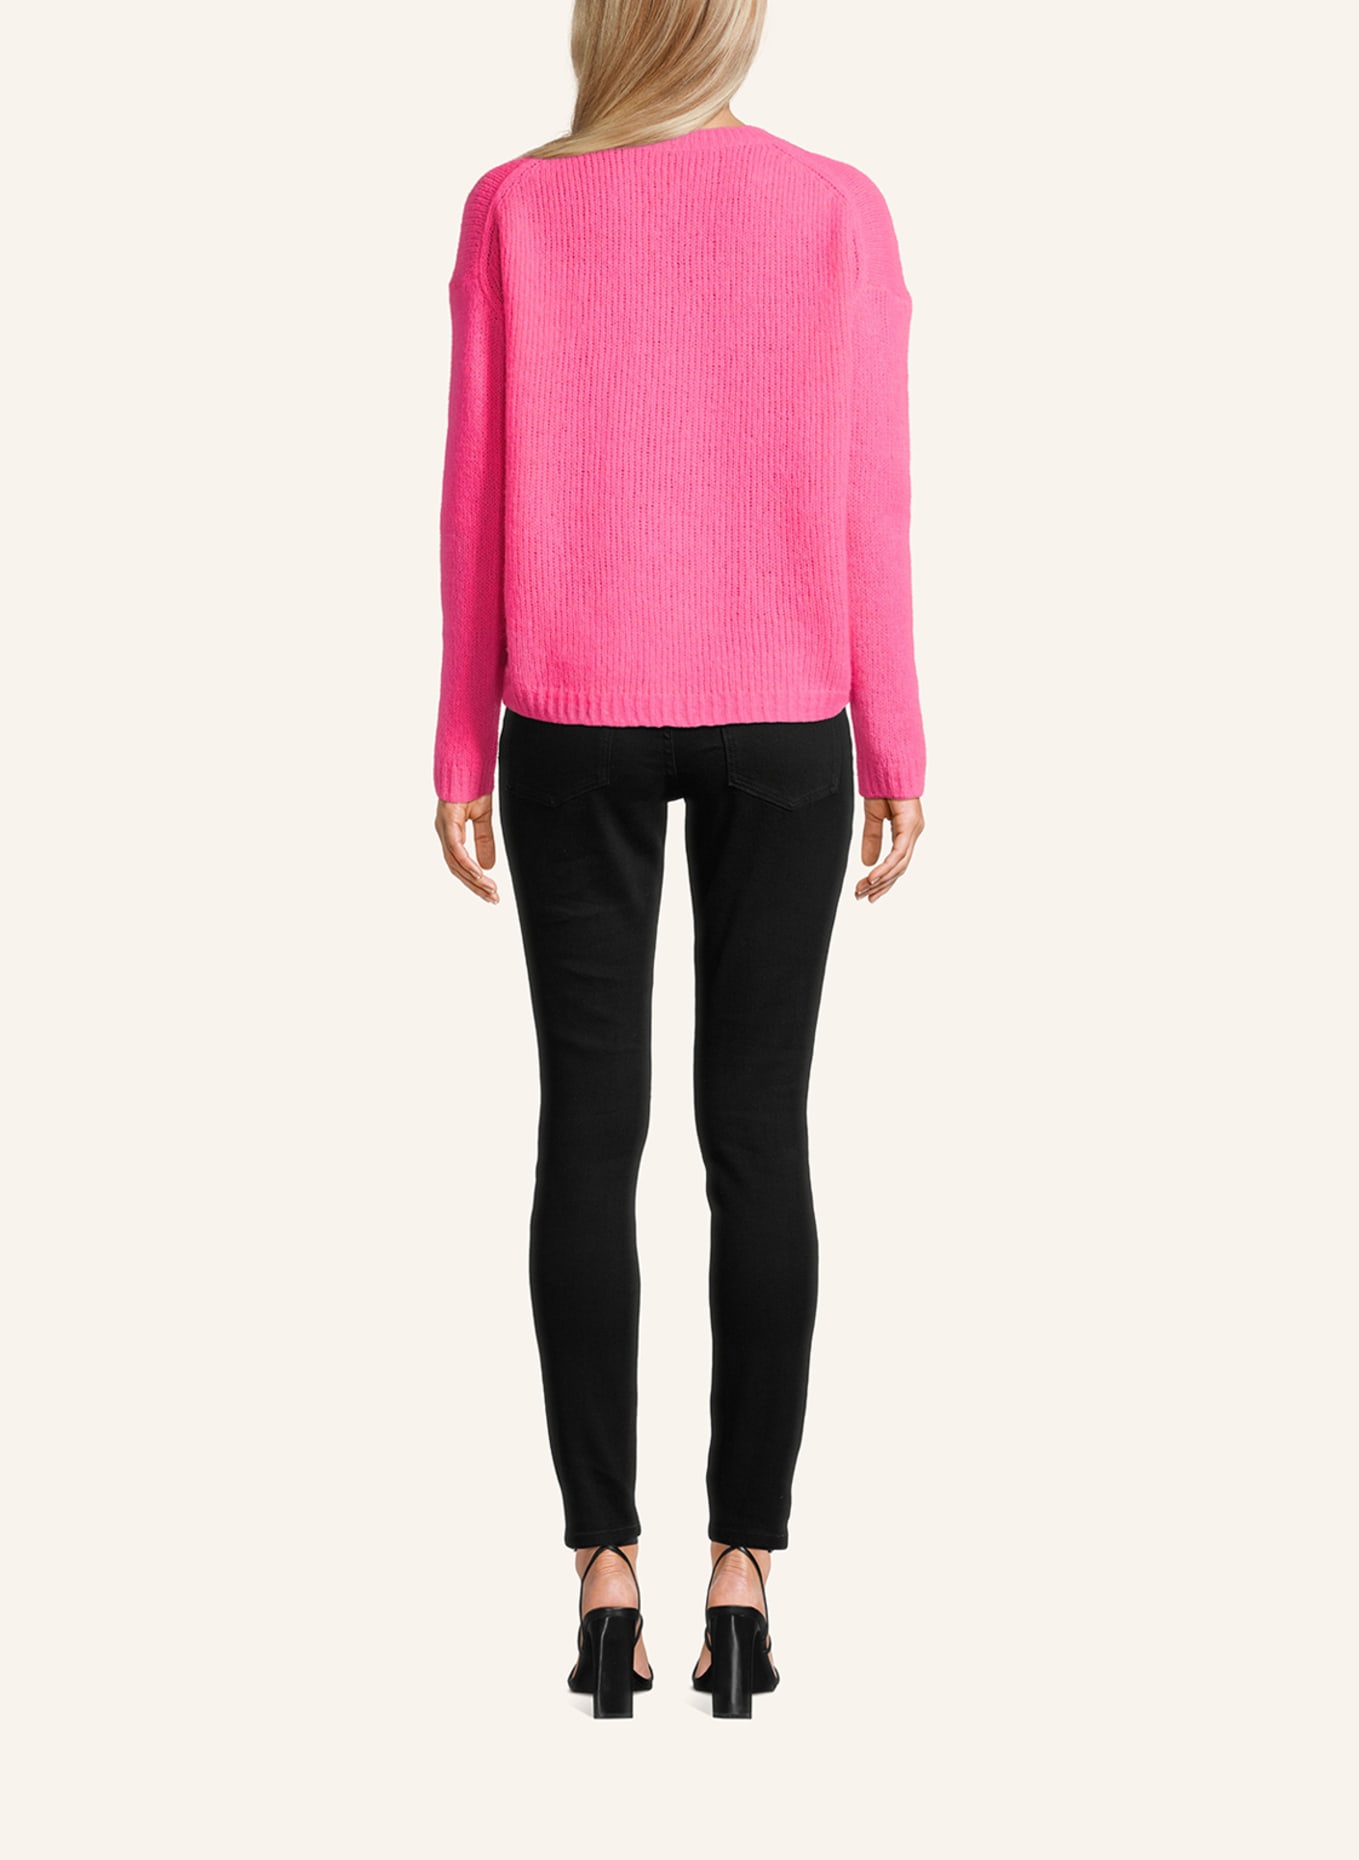 Princess GOES HOLLYWOOD Pullover mit Merinowolle, Farbe: PINK (Bild 2)